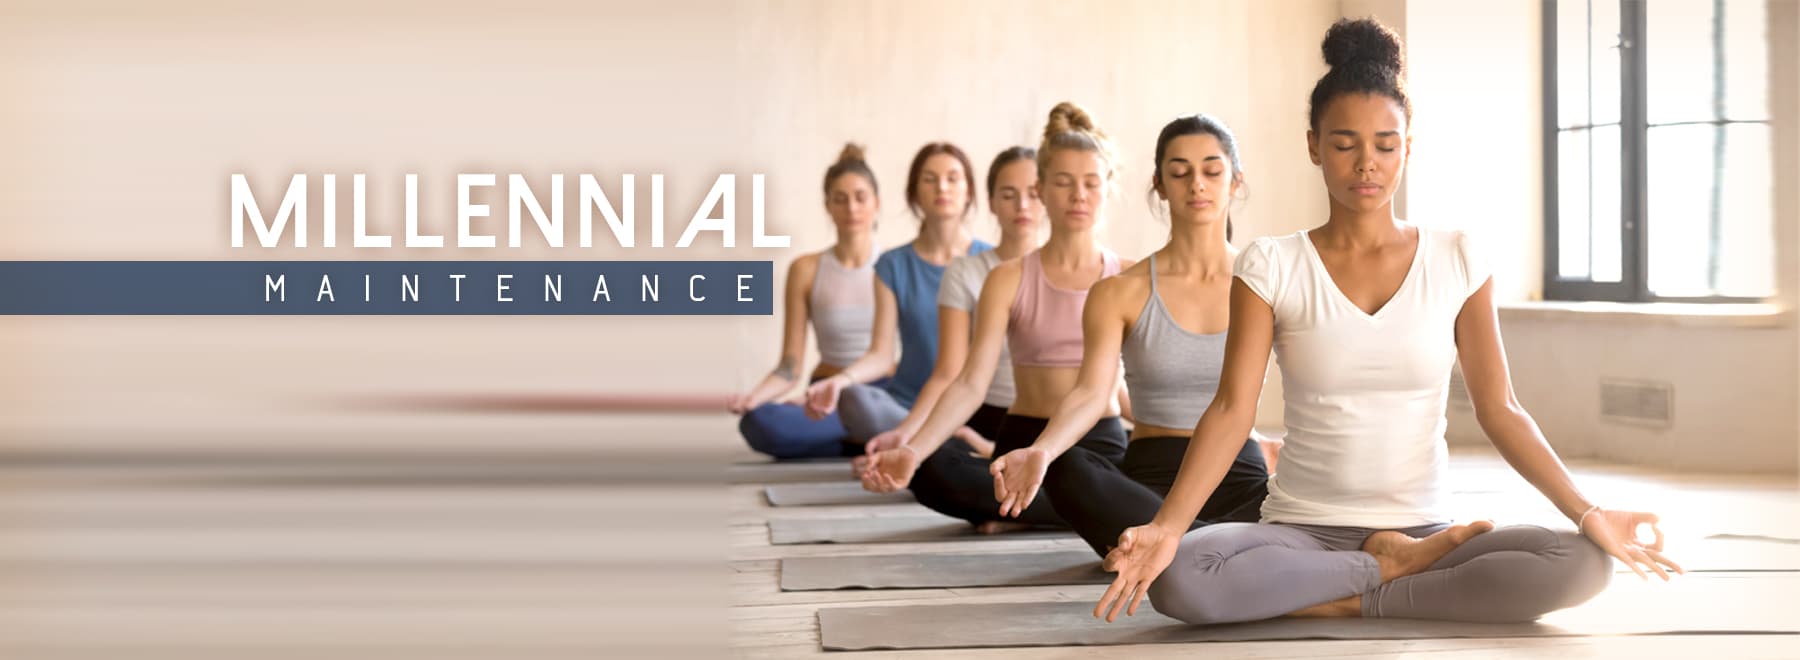 Multiracial female yoga group meditating with title Millennial Maintenance displayed.